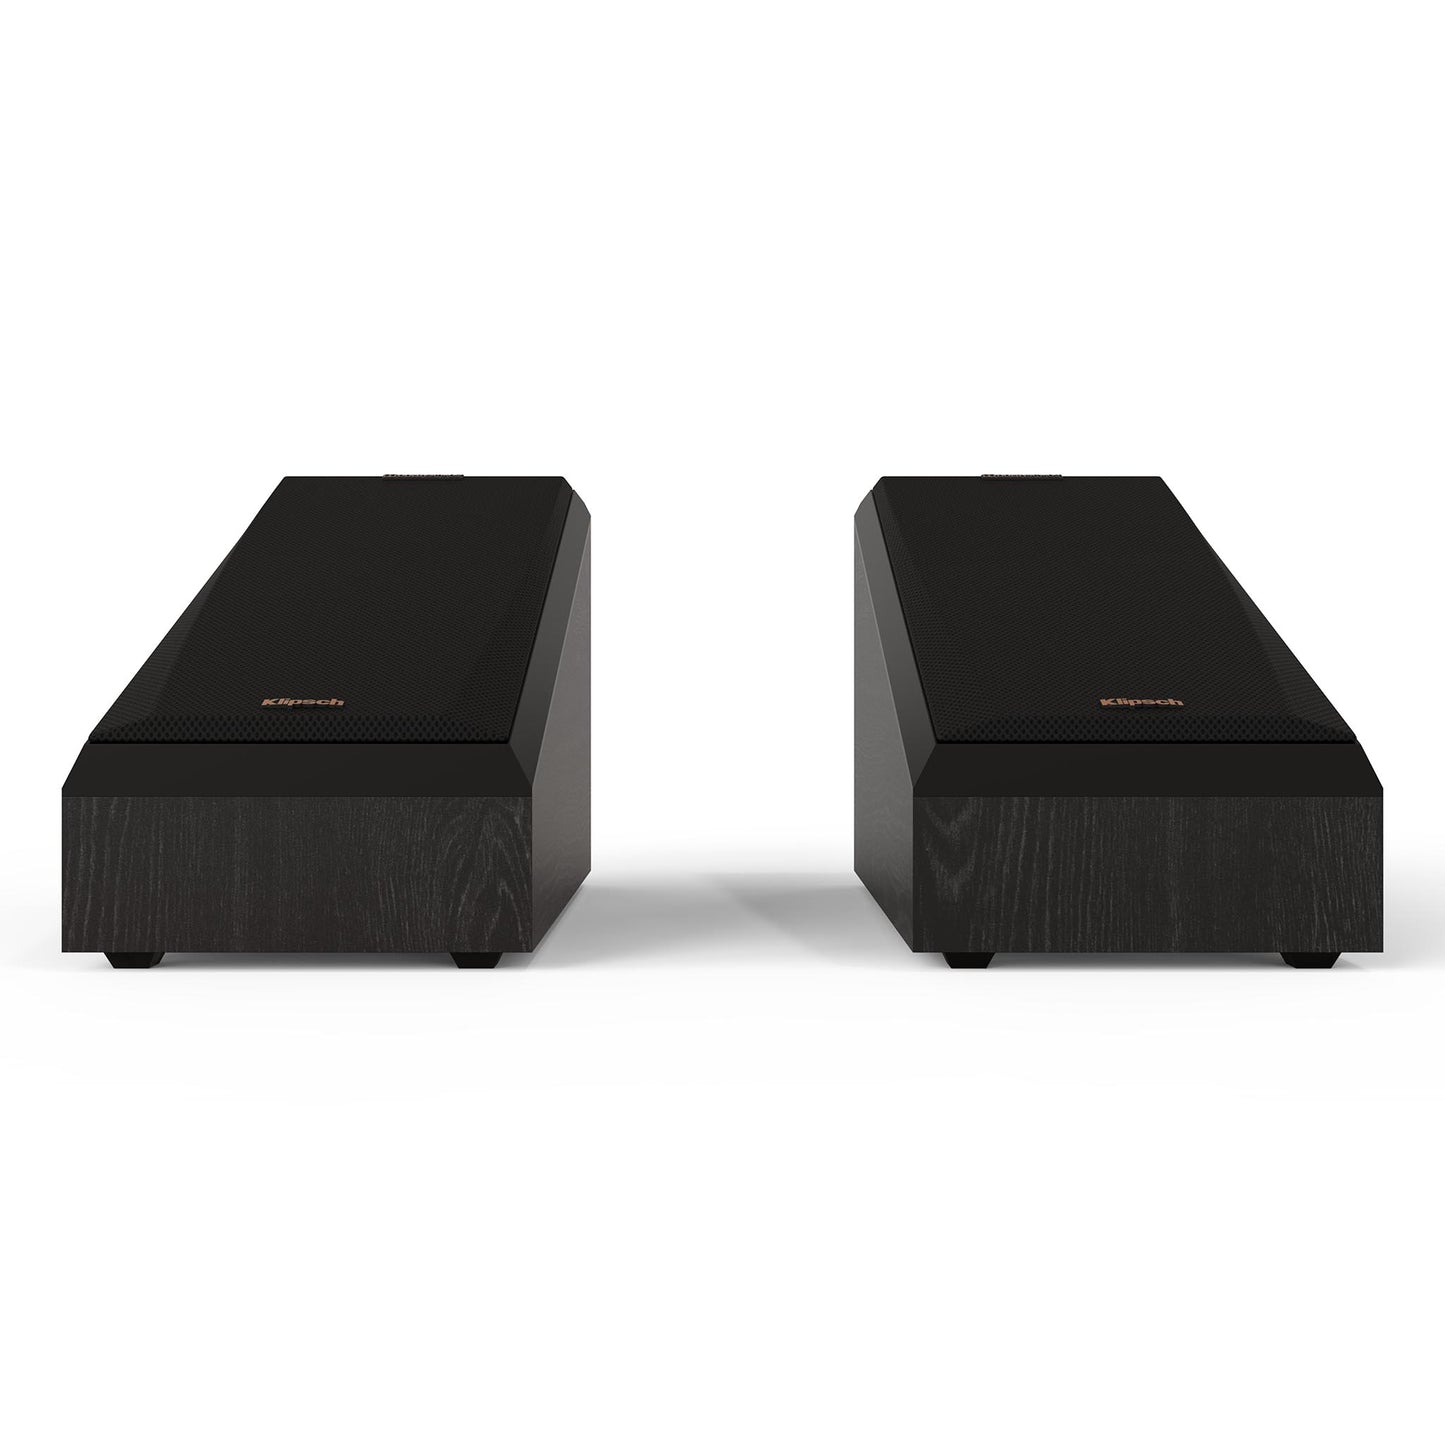 Klipsch Reference Premiere RP-500SA II Dolby Atmos Speaker (pair)